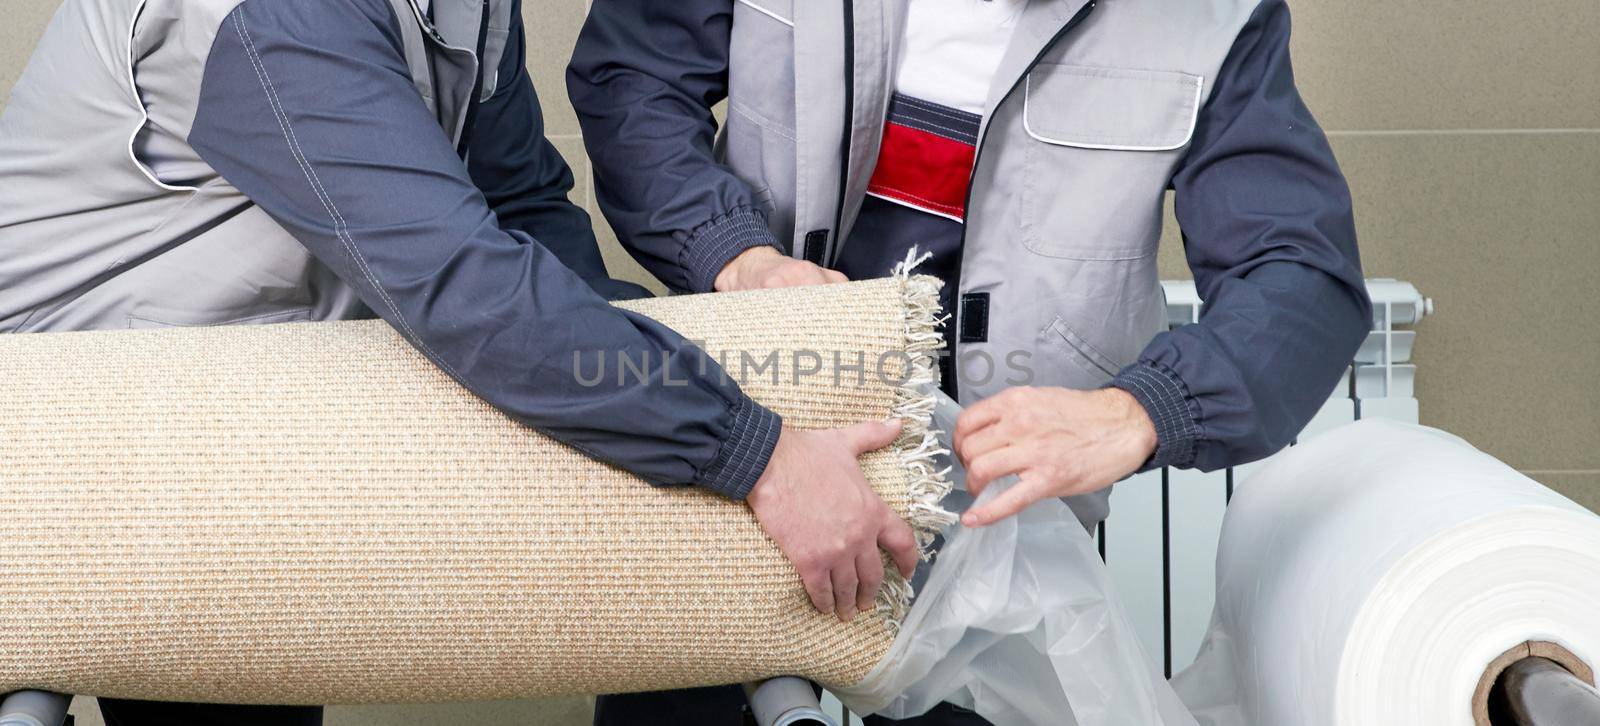 Men workers packing carpet in a plastic bag after cleaning it in automatic washing machine and dryer in the Laundry service by Mariakray